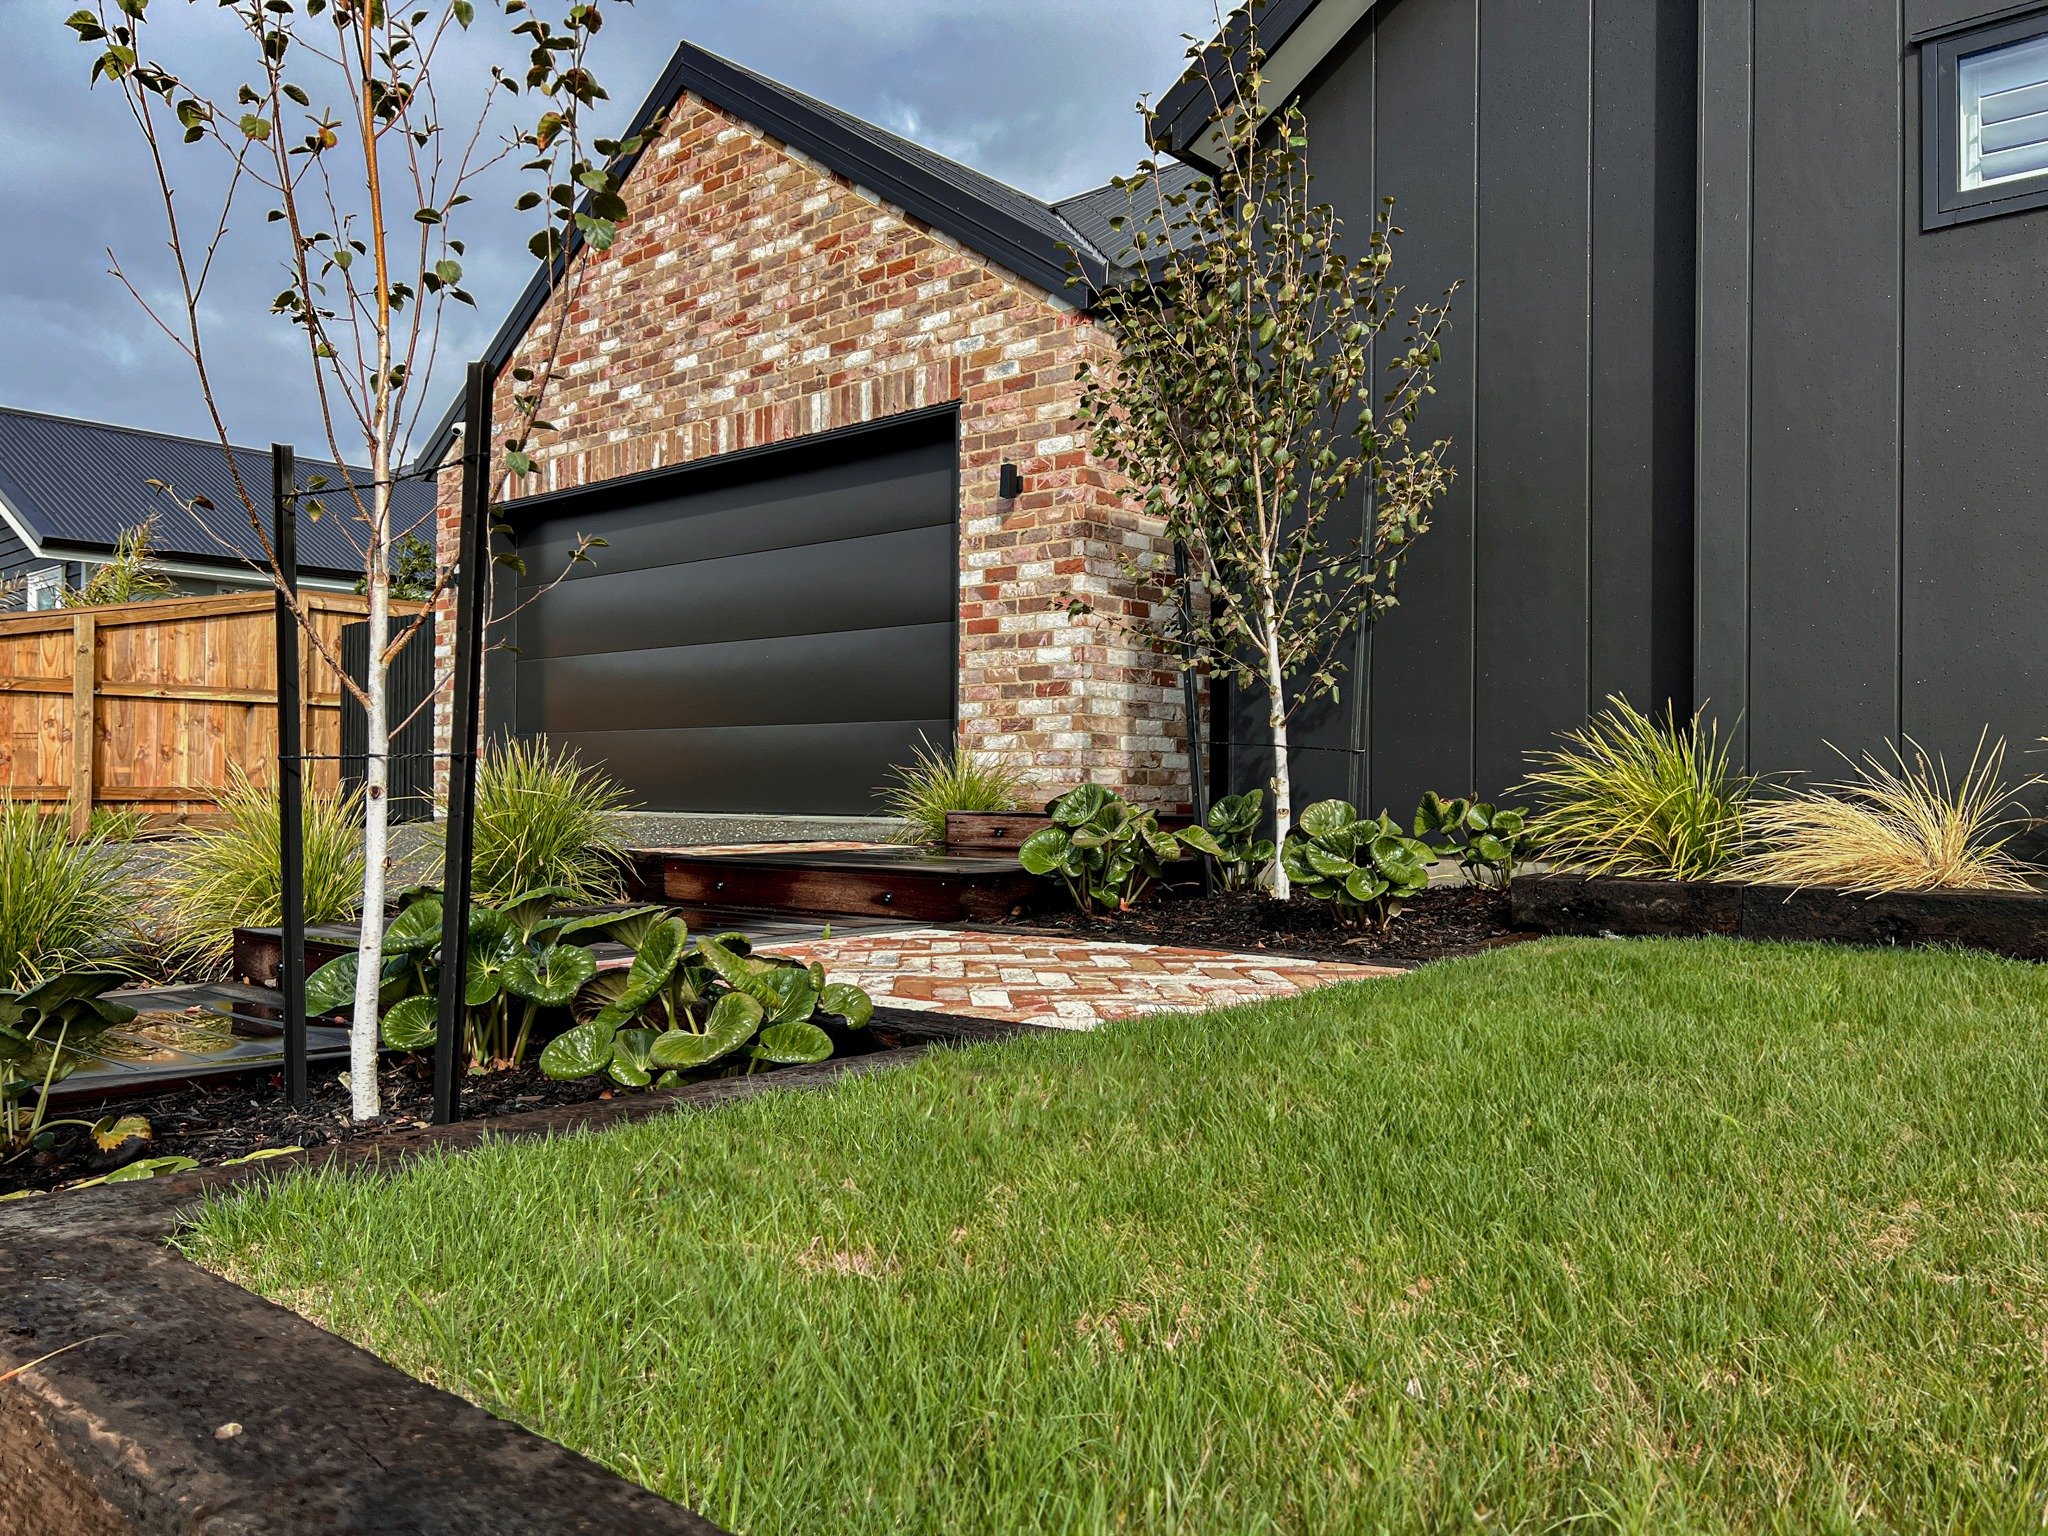 The new @gjgardnerhomesnz Nelson Show home features several simple elements that add value to any property, such as:
- Feature brickwork to match the cladding
- Batten screens for privacy
- A fireplace to enhance the entertainment area
- Raised plant